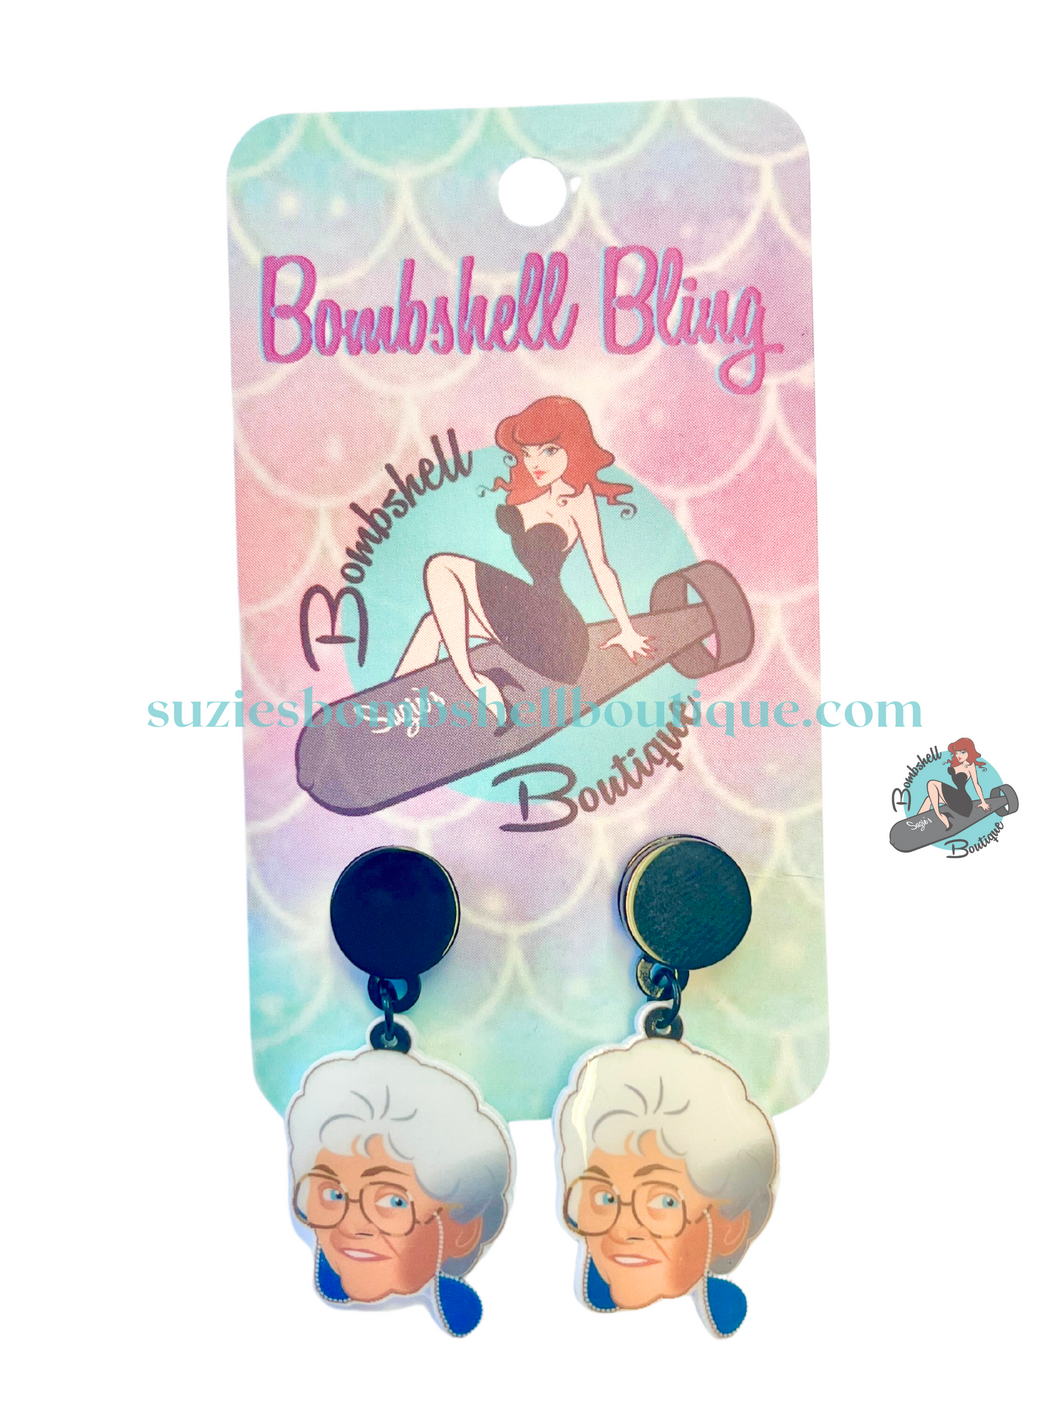 Bombshell Bling Sophia Earrings Golden Girls inspired acrylic resin alloy costume jewellery pinup earrings Canadian Pin-Up Shop Suzie's Bombshell Boutique